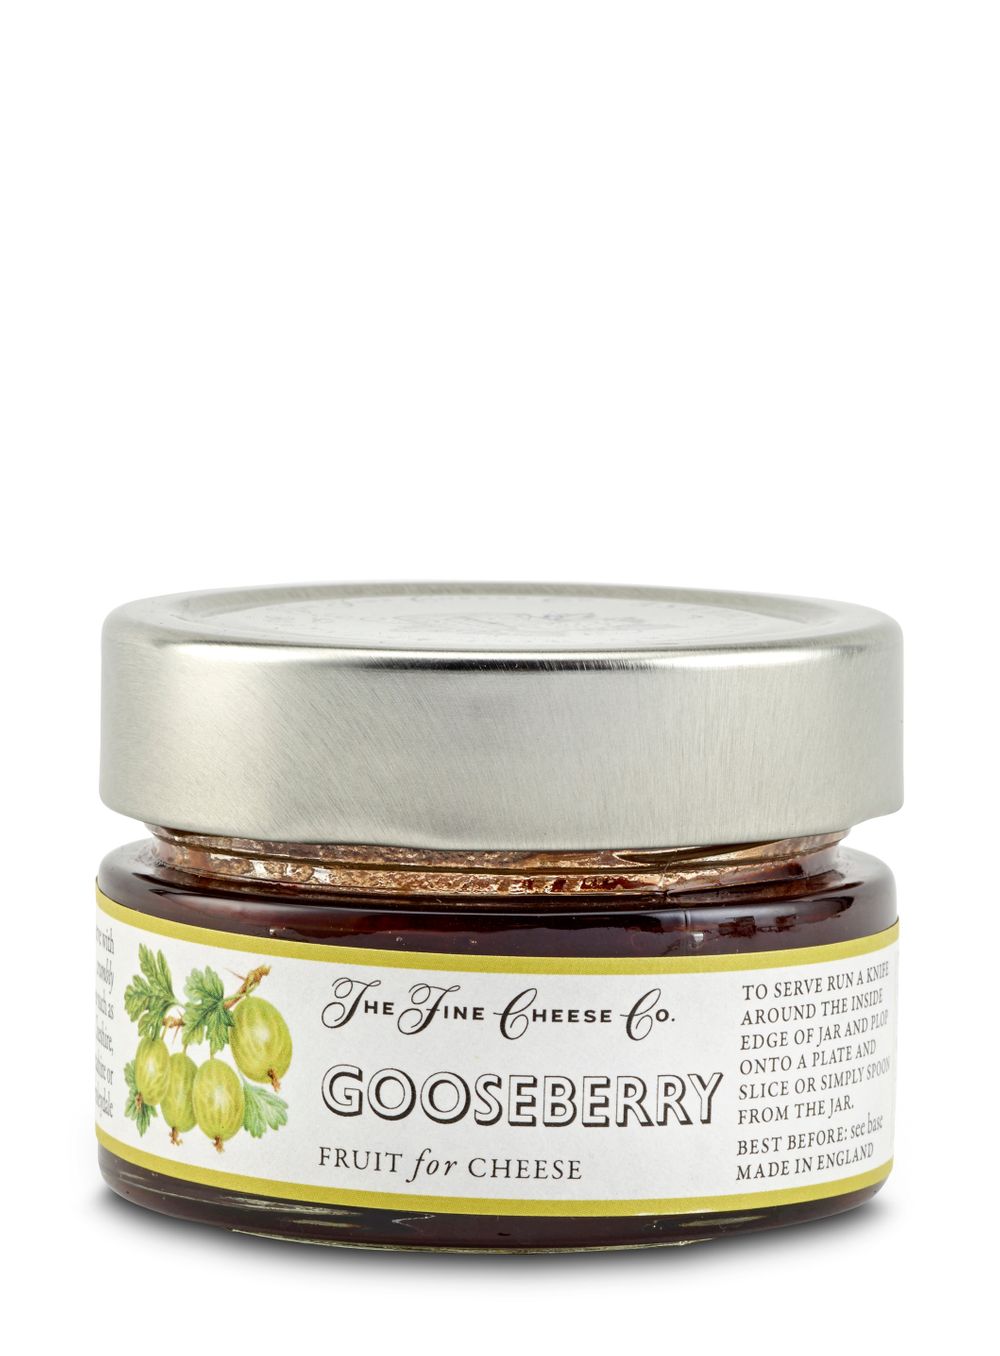 Gooseberry Fruit Puree for Cheese